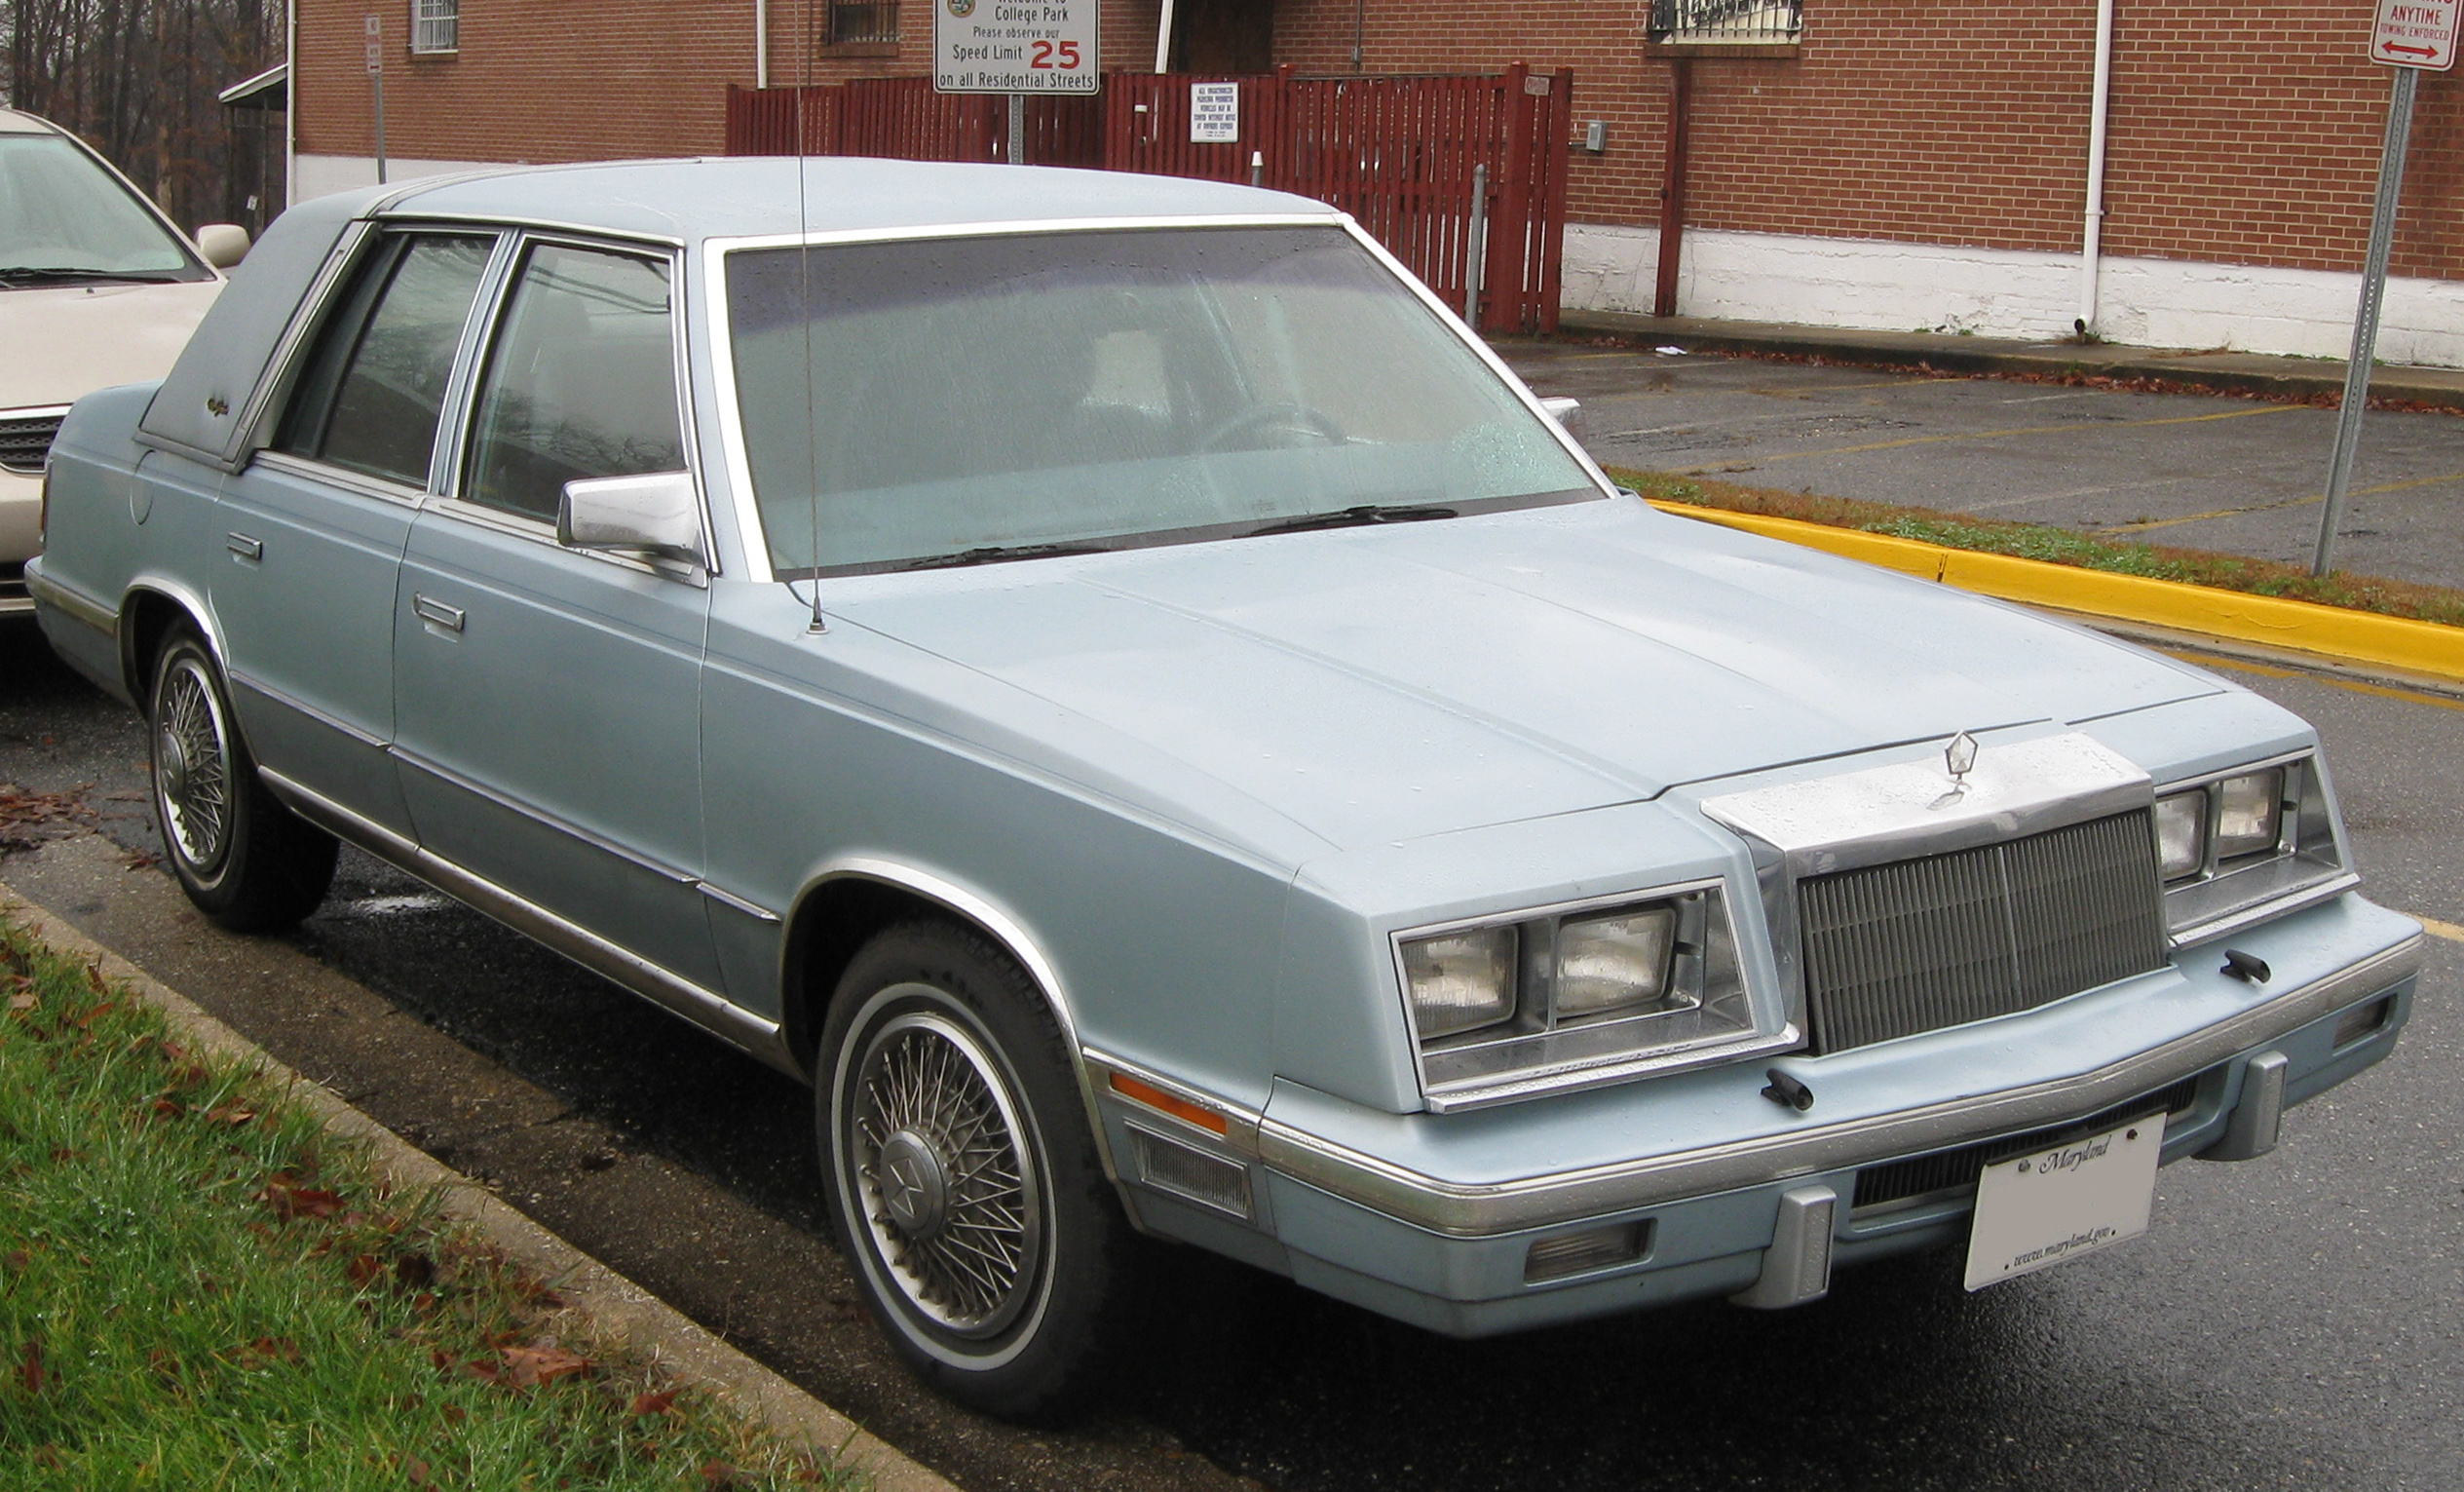 1988 Chrysler New Yorker Information and photos MOMENTcar